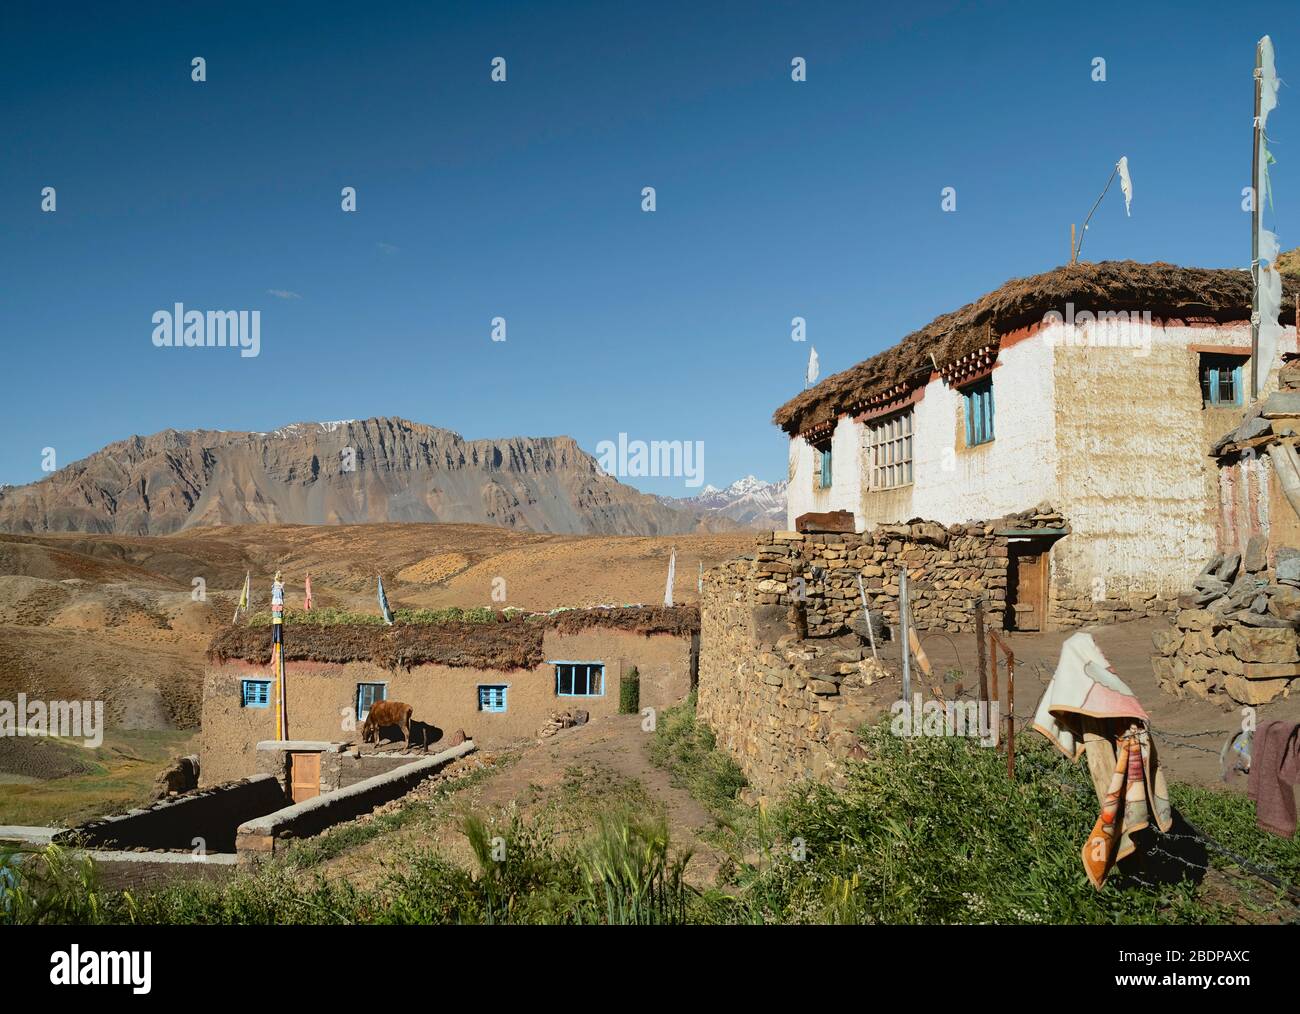 Village scene with traditional houses and animal fodder drying on roofs, fields and farmland with Himalayas in background under blue sky in summer. Stock Photo